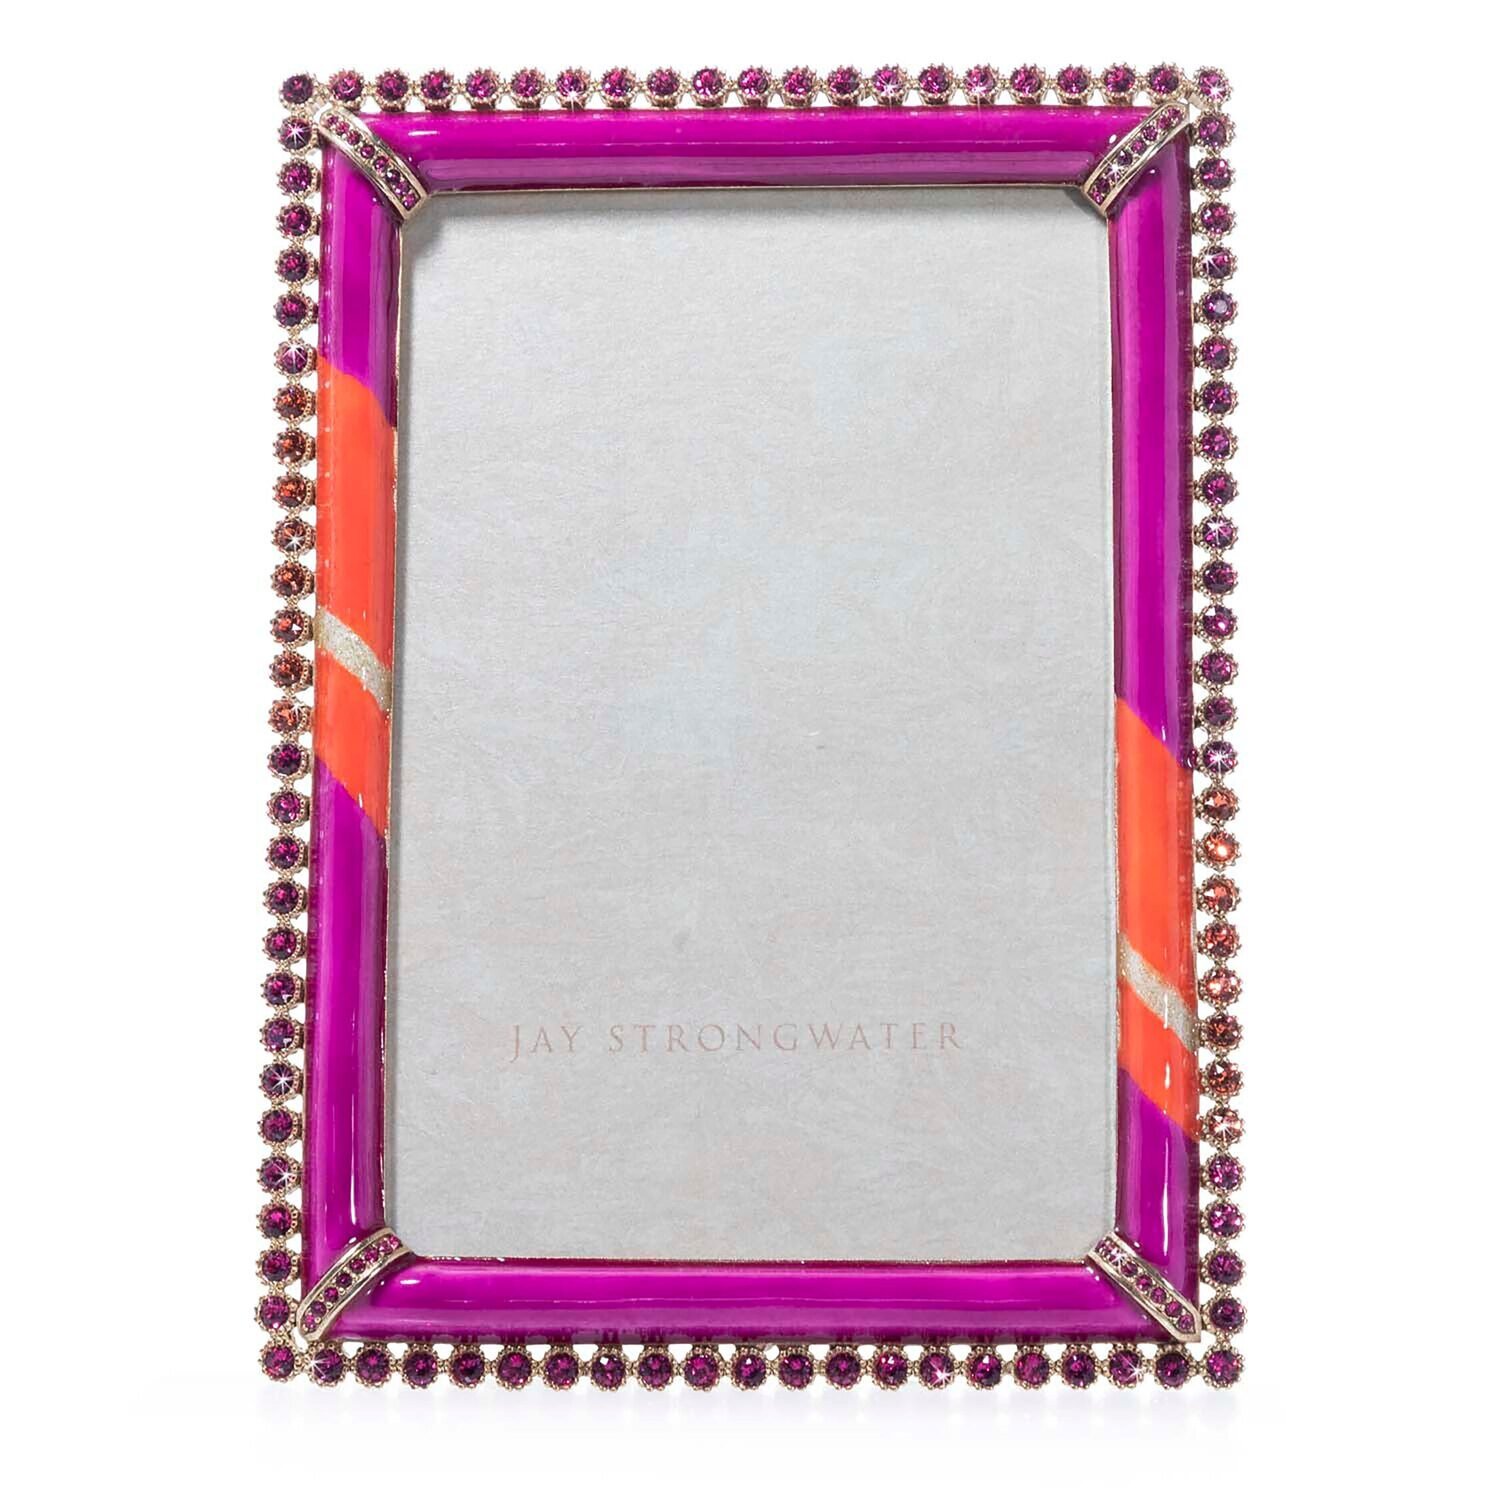 Jay Strongwater Lorraine Stone Edge 4 x 6 Inch Picture Frame SPF5510-202